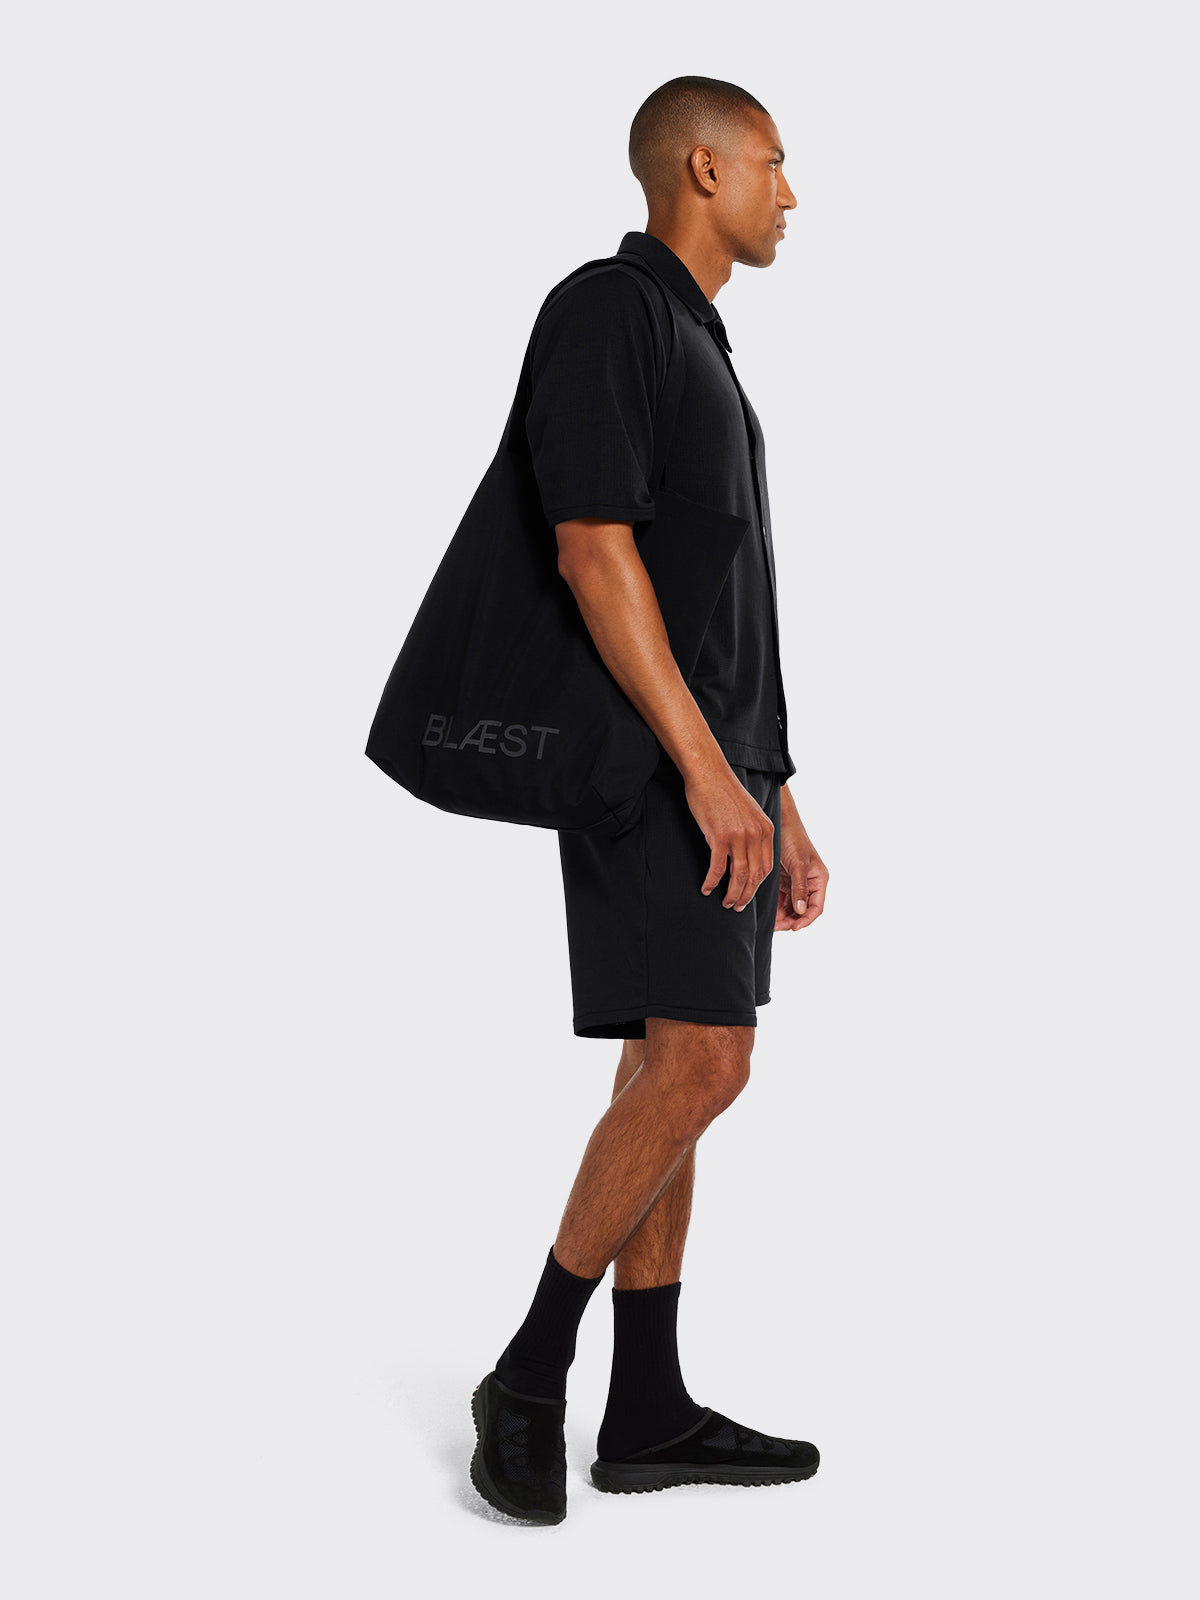 Model with Moa tote bag in Black by Blæst